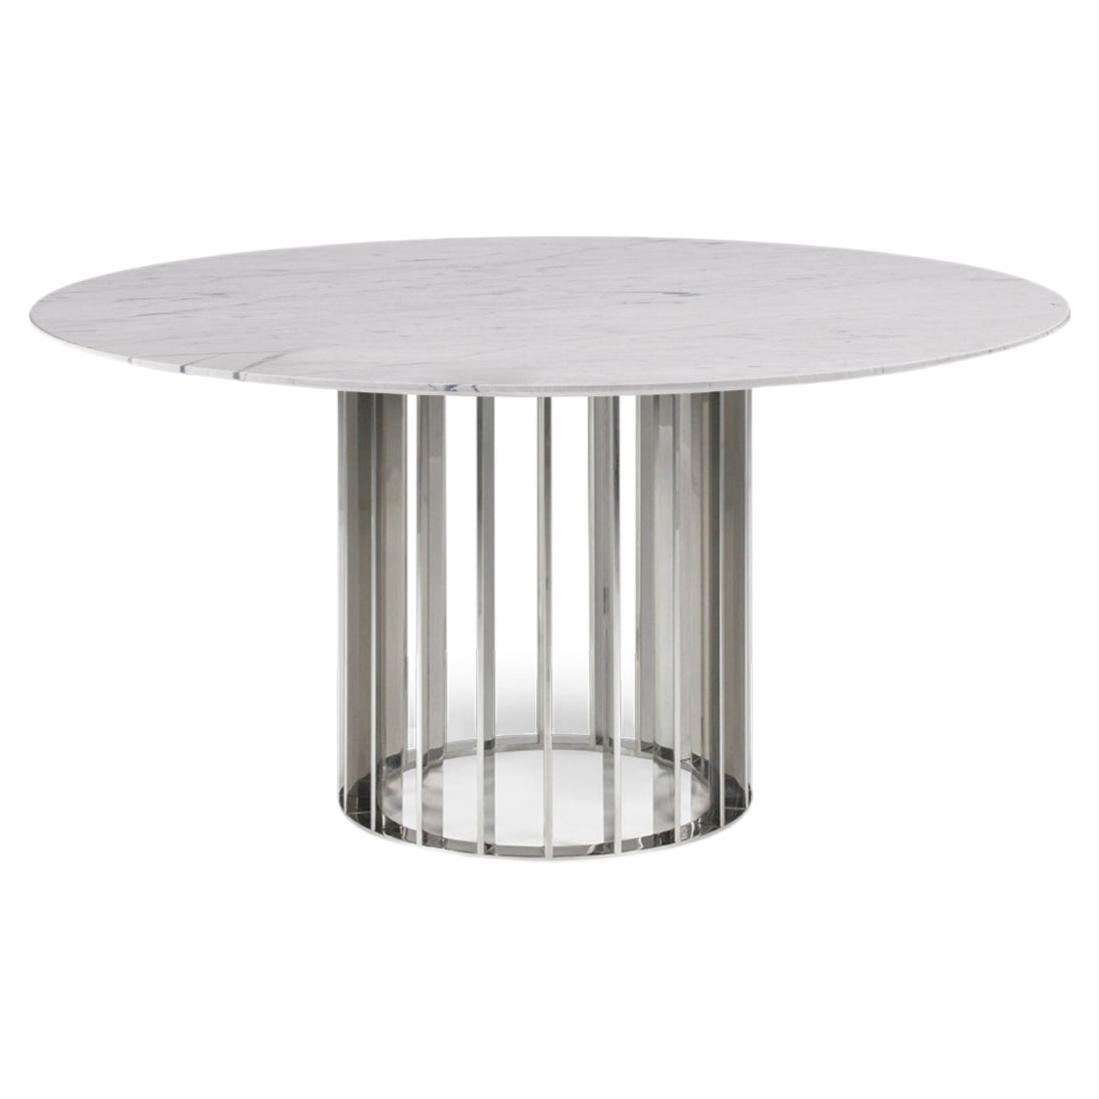 This unique dining table uses gorgeous Brown marble top and elegant and modern stainless steel base uses the repetition of metal stripes to bring rhythm to the base. Its design is simple but full of grace and WOW factor. 
The best craftsmanship was